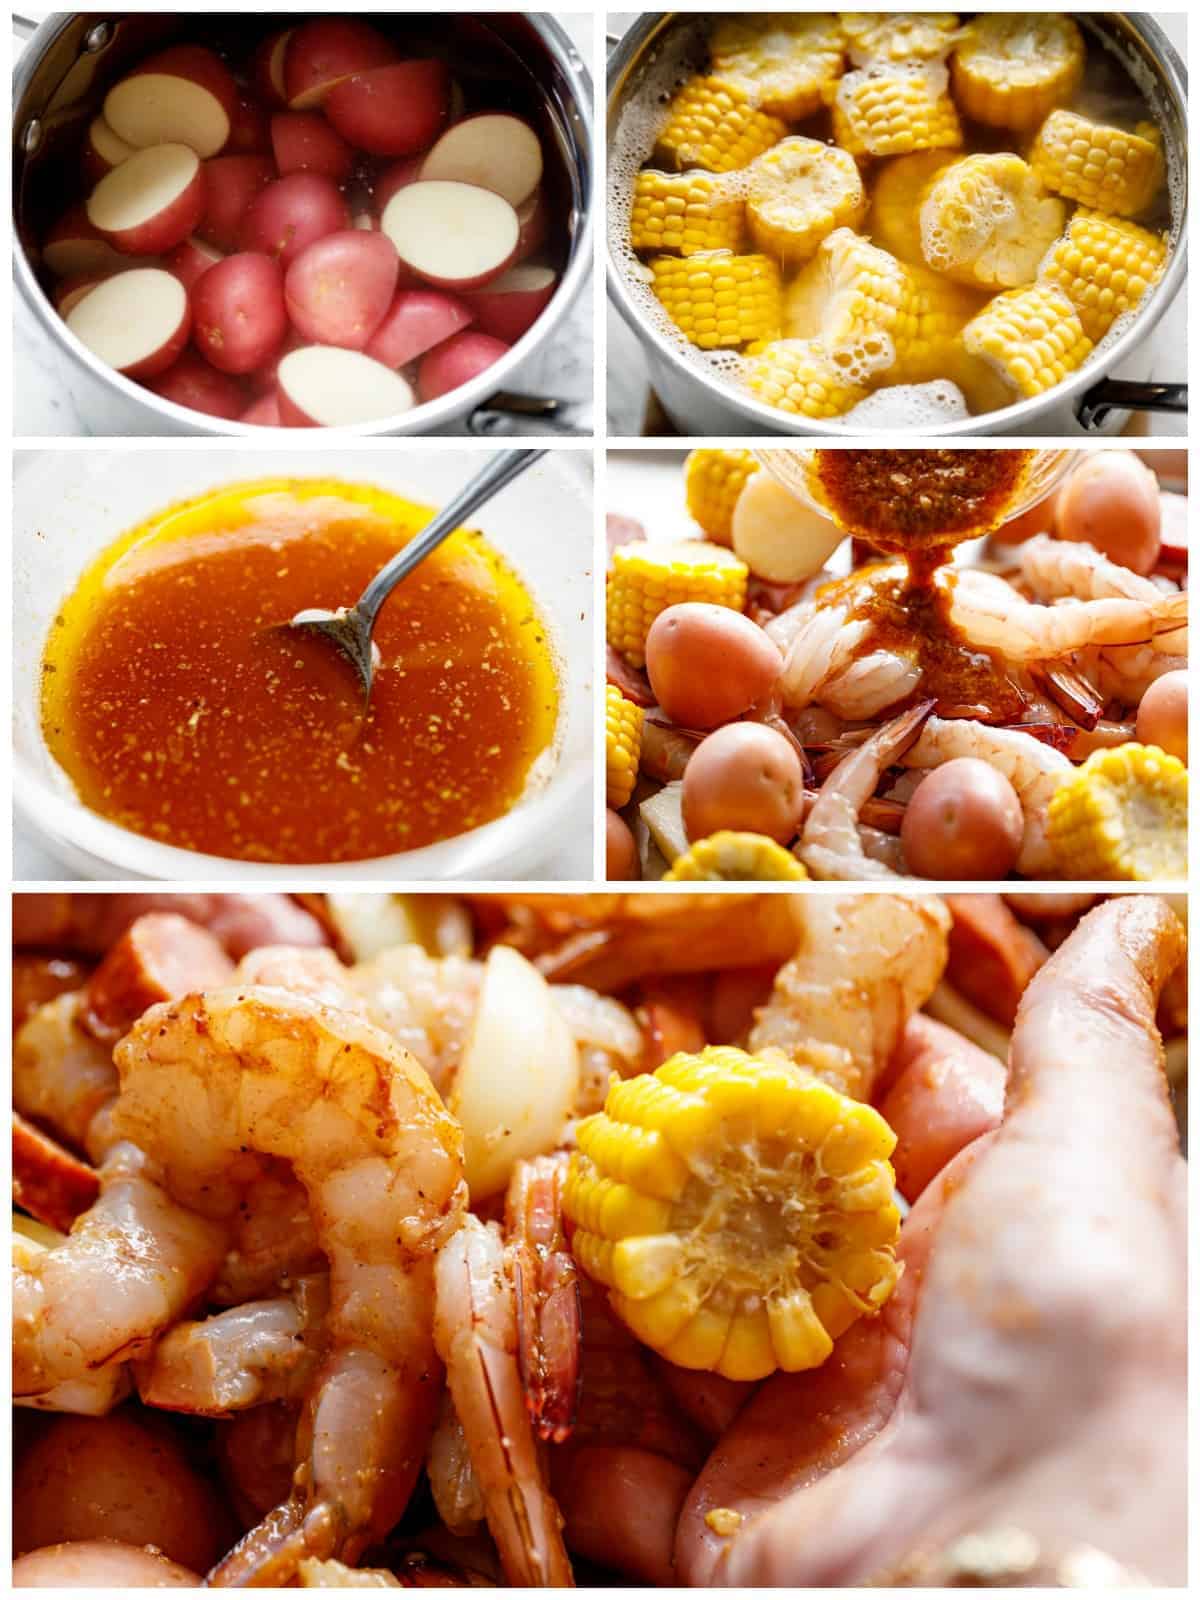 How to make Boiled Shrimp with Garlic Butter and Old Bay Seasoning in the Oven. | takeoutfood.best